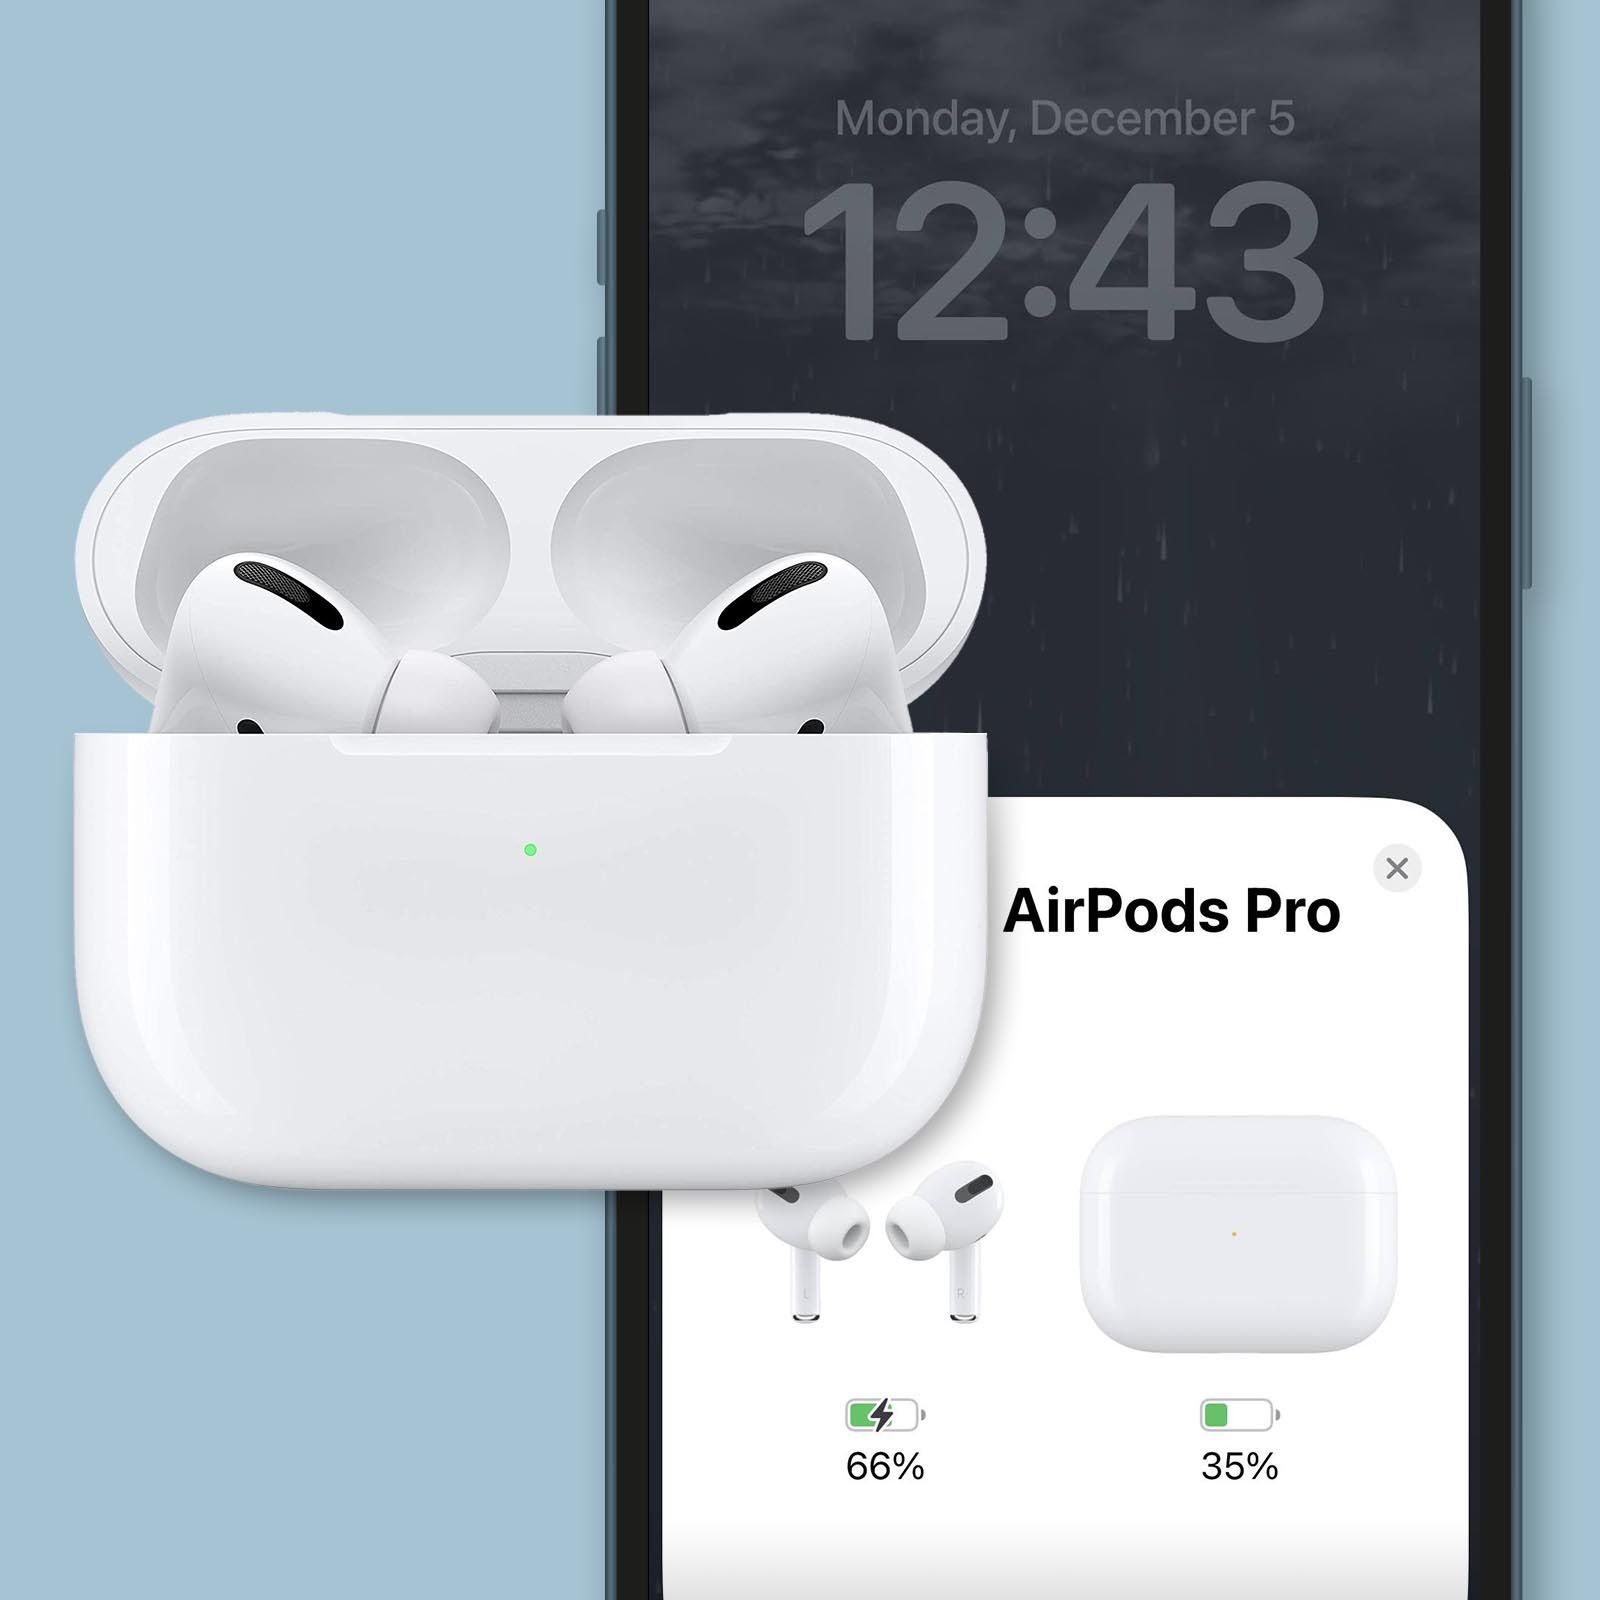 How To Check Battery Of Airpods